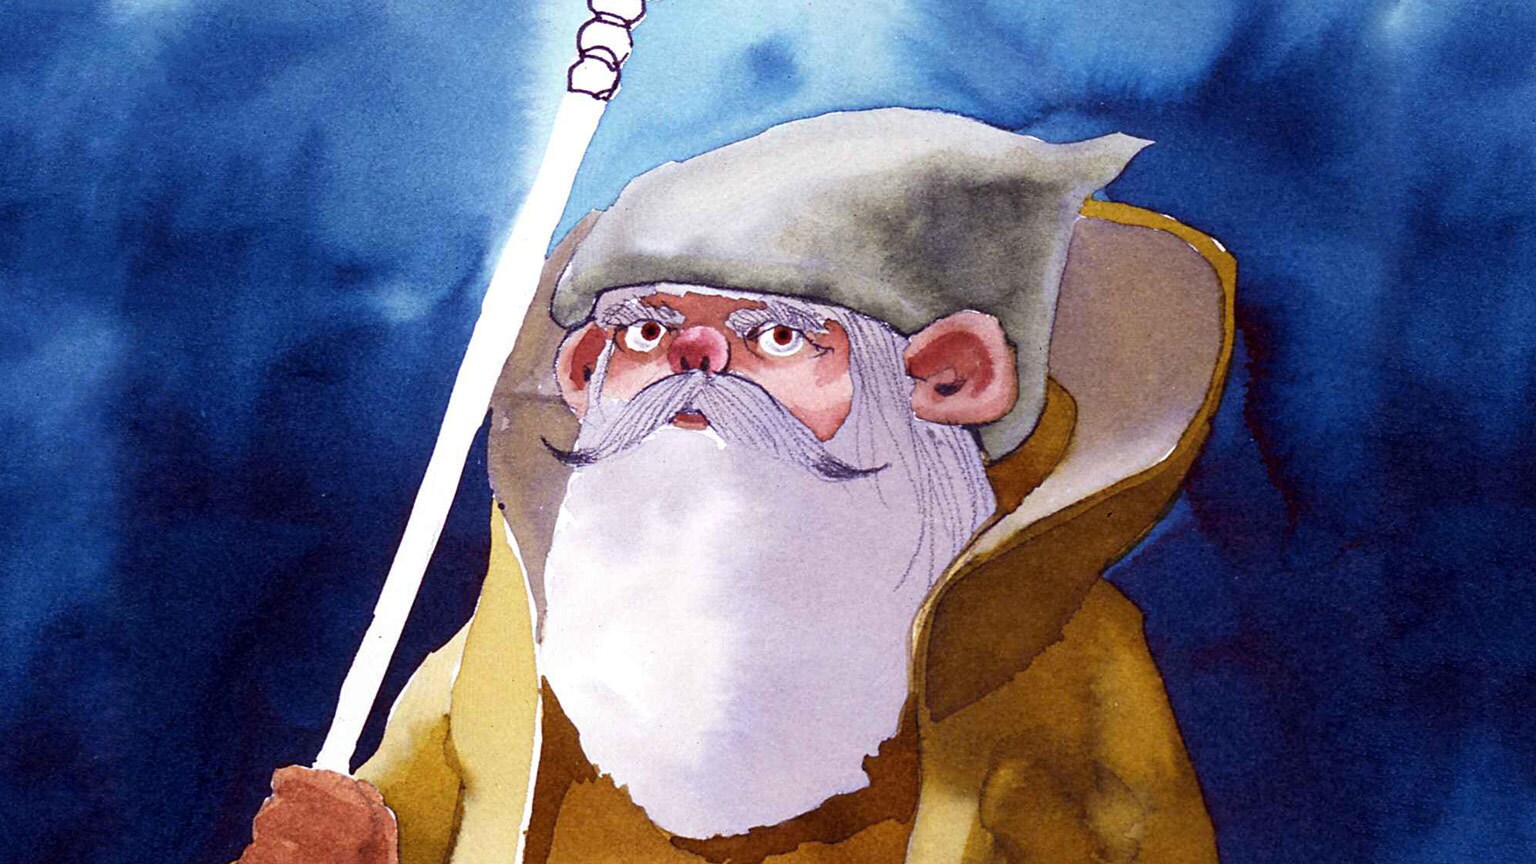 Yoda Almost Looked Like a Garden Gnome, Plus 4 More Early Star Wars Character Concepts